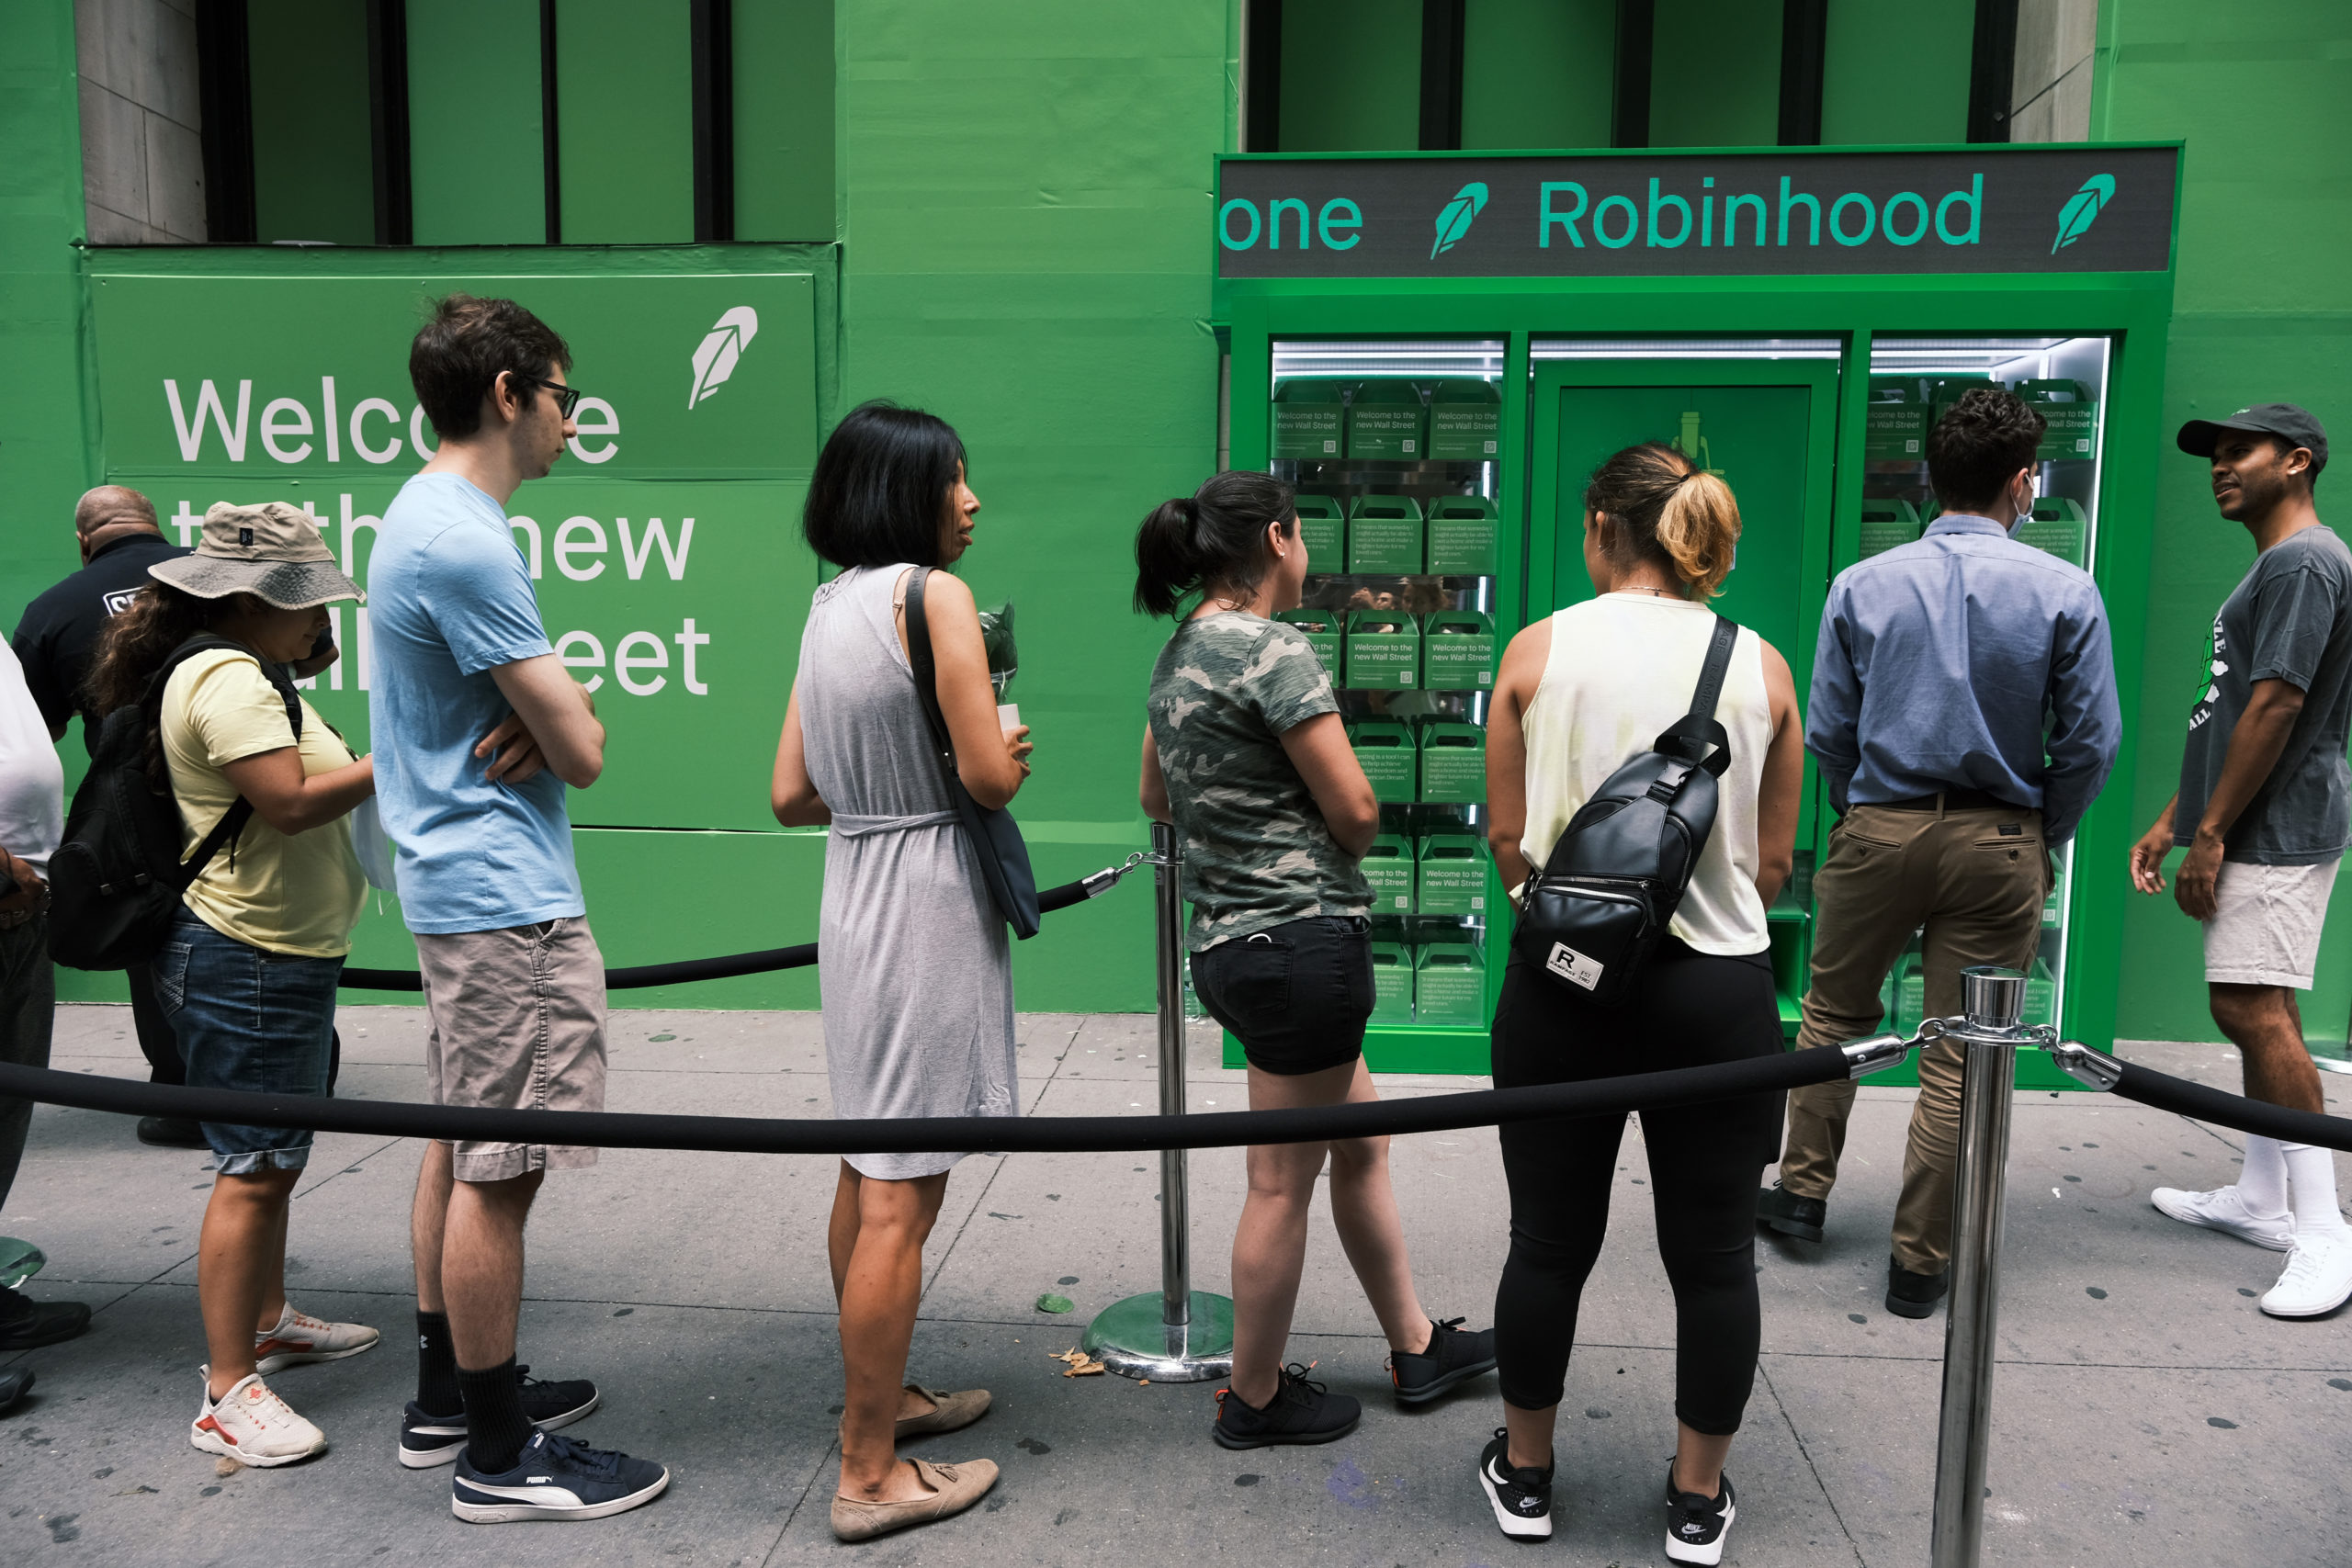 People wait in line for t-shirts at a pop-up kiosk for the online brokerage Robinhood along Wall Street. (Photo by Spencer Platt/Getty Images)